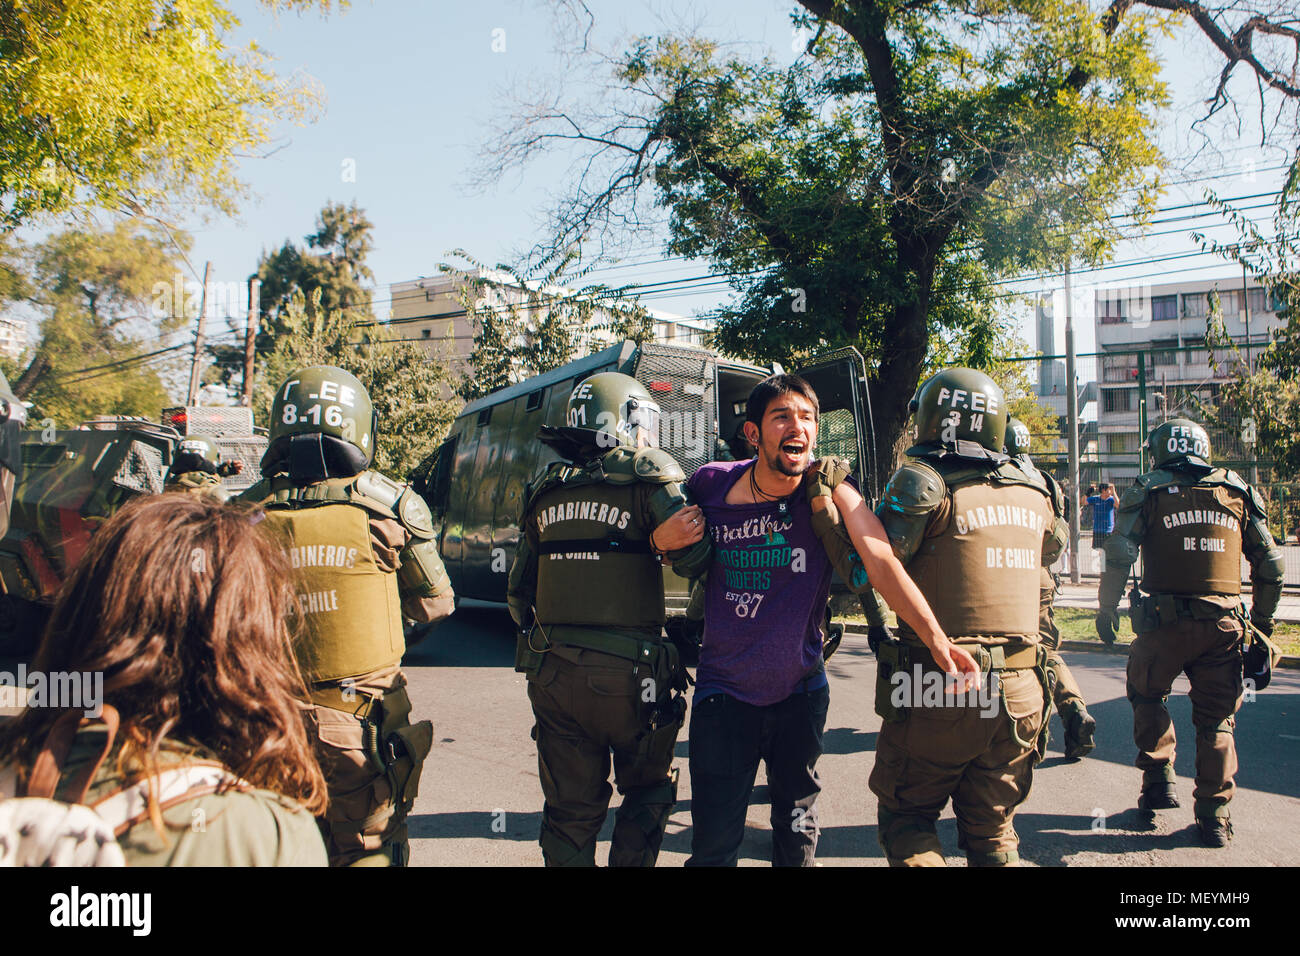 Santiago, Chile - April 19, 2018: Protester arrested in the University of Santiago during a demonstration demanding an end to the Profit in the Educat Stock Photo